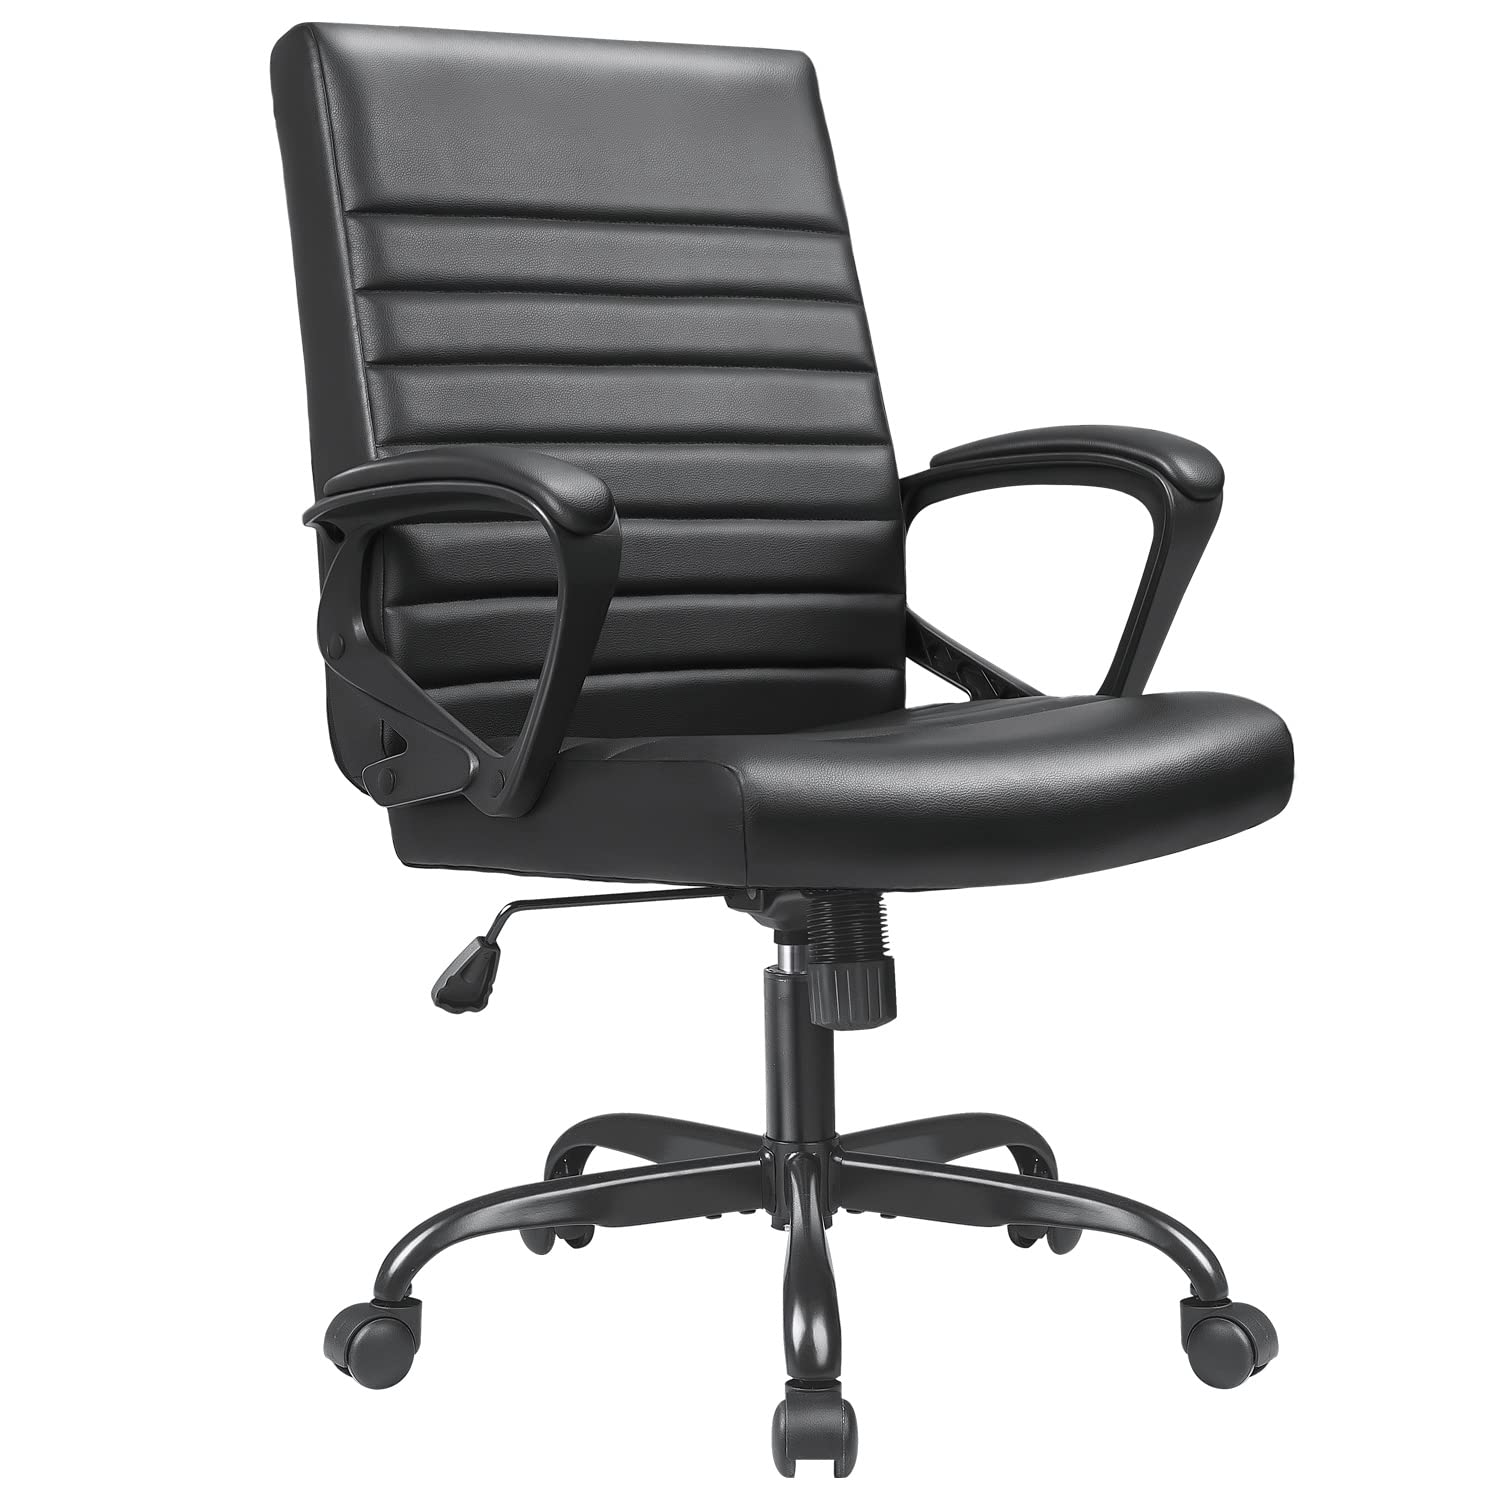 Devoko Office chair Mid Back Desk chair PU Leather Executive Office chair Ribbed computer Task chair Swivel Rolling chair with P